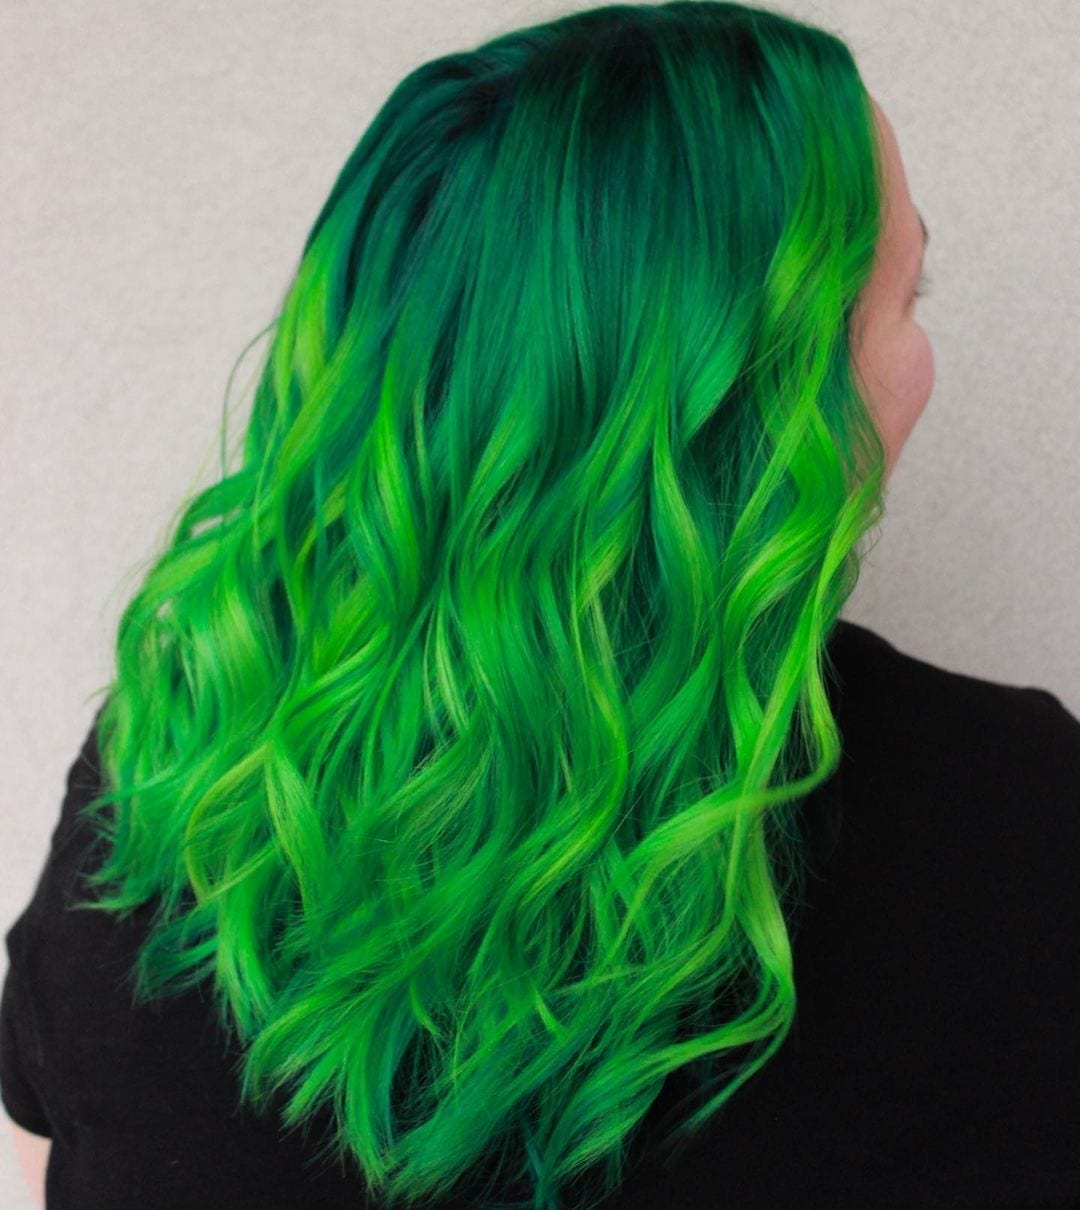 Green galaxy hair inspiration on a smiling woman in a black tshirt